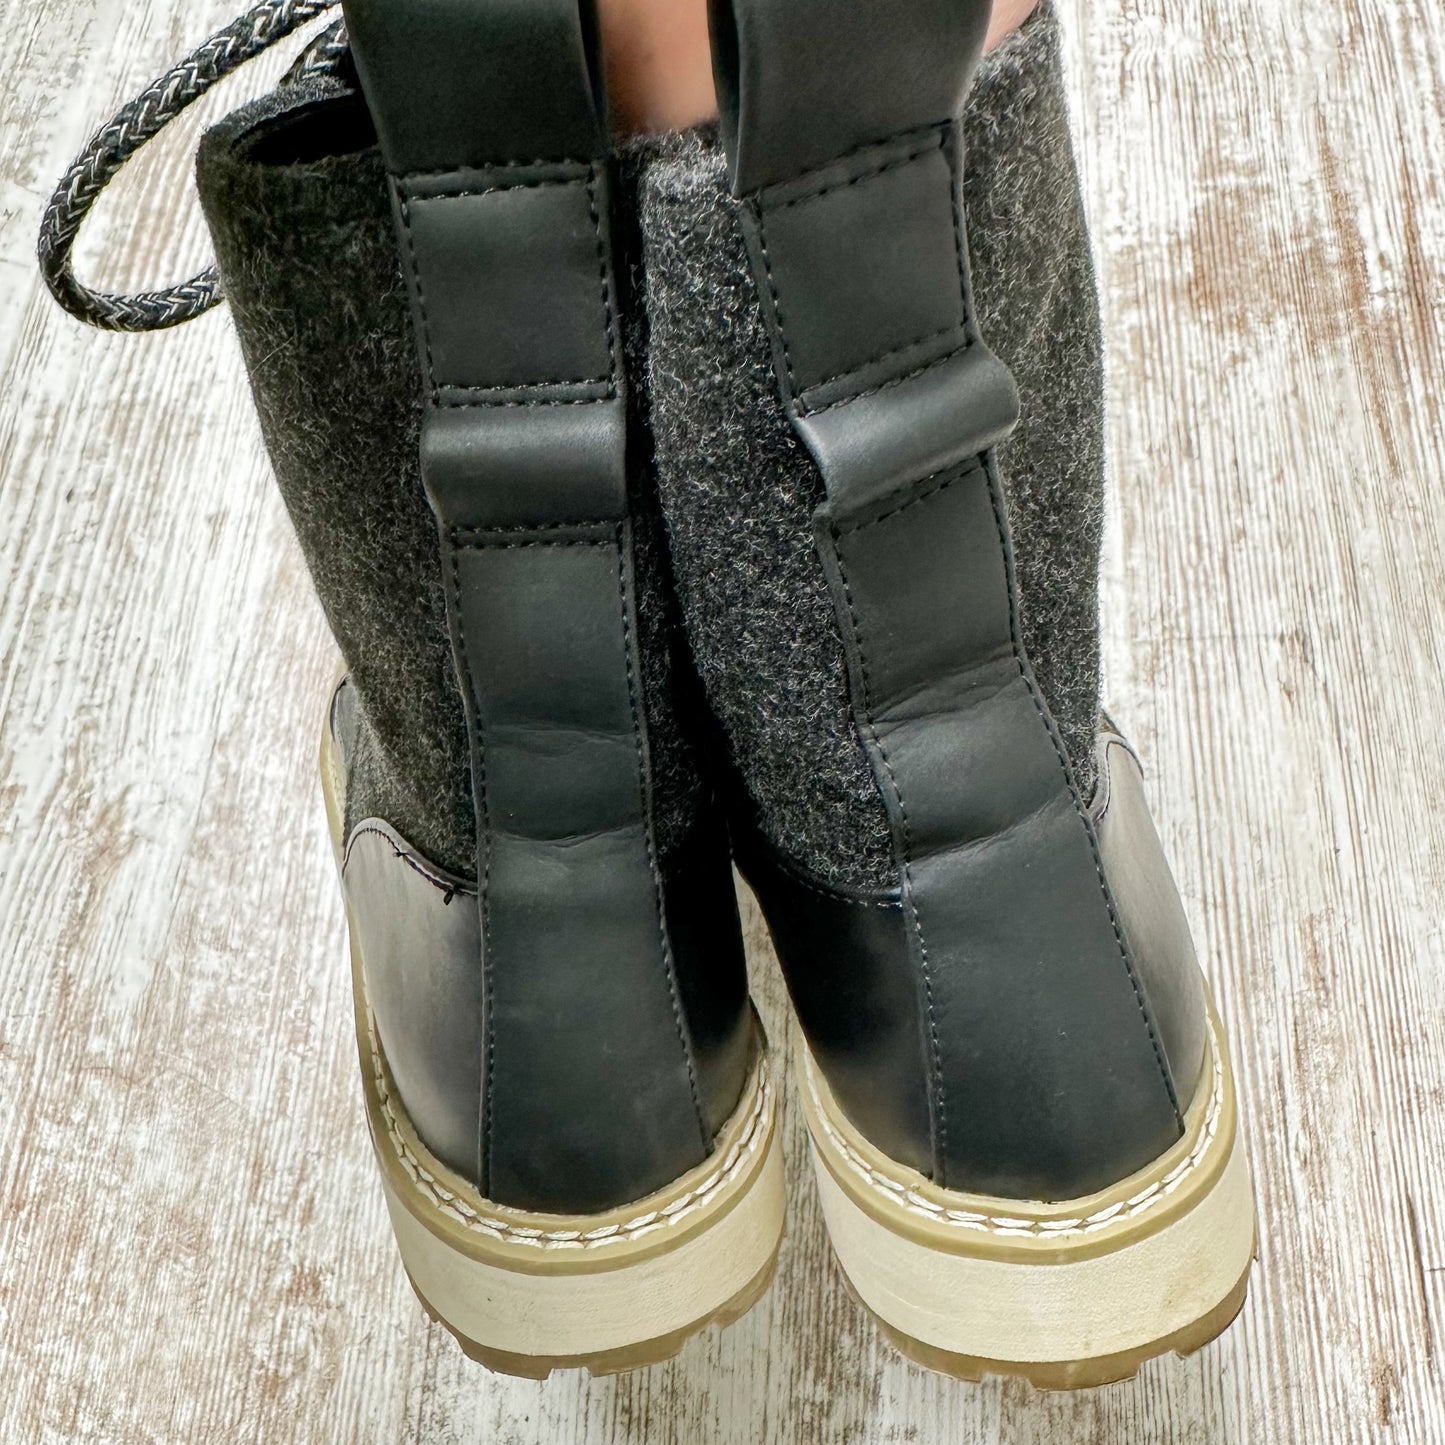 Universal Threads Courtney Hiking Boot Black Size 9.5